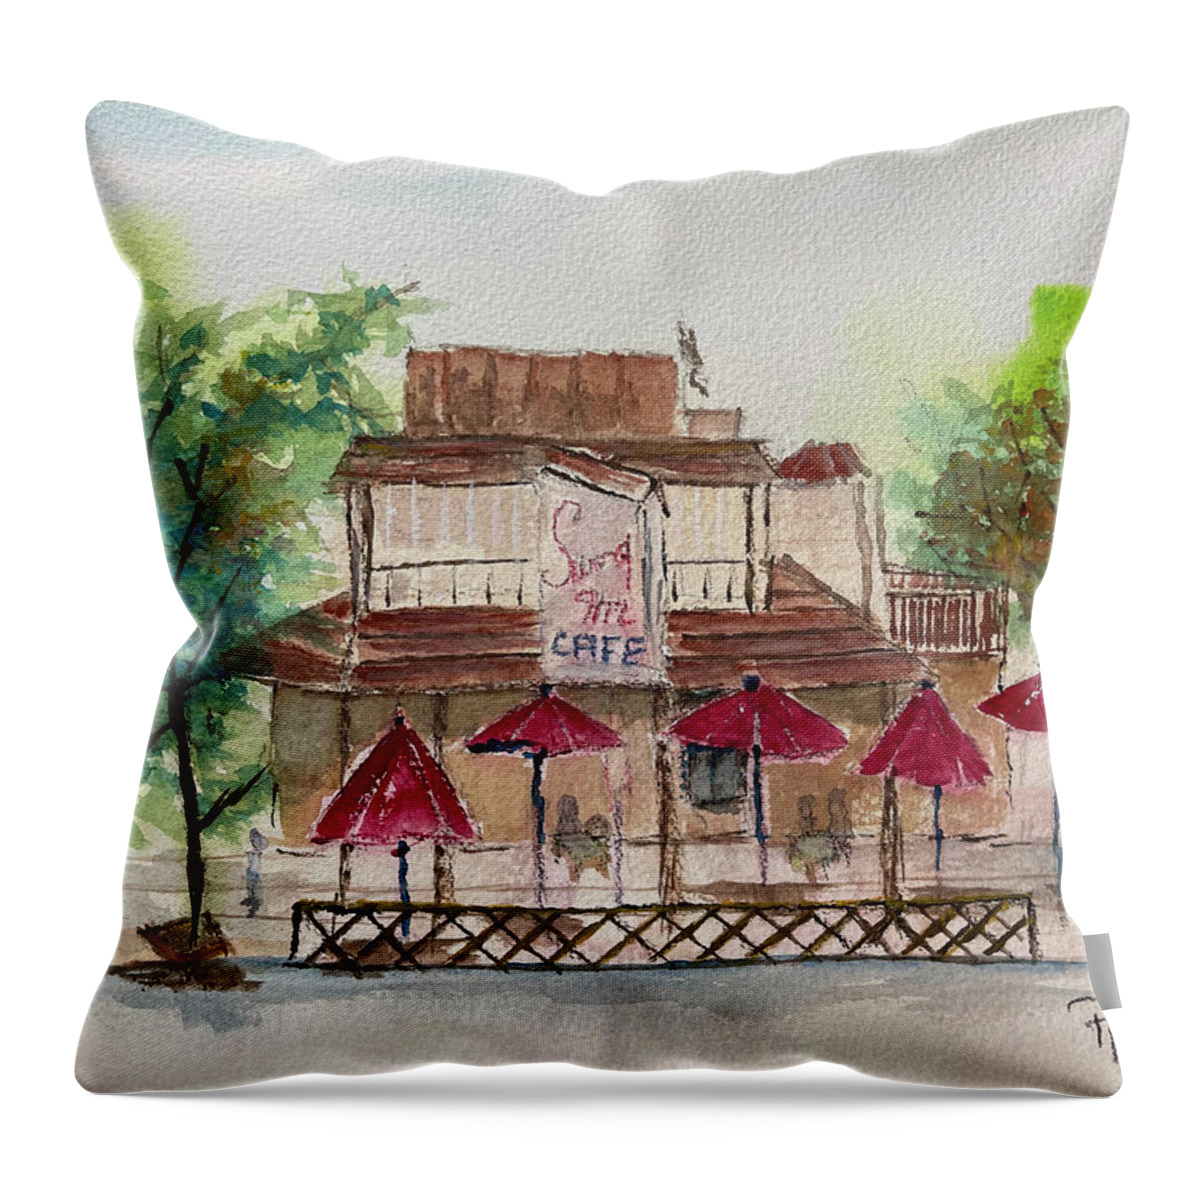 Swing Inn Throw Pillow featuring the painting Swing Inn Cafe Temecula by Roxy Rich